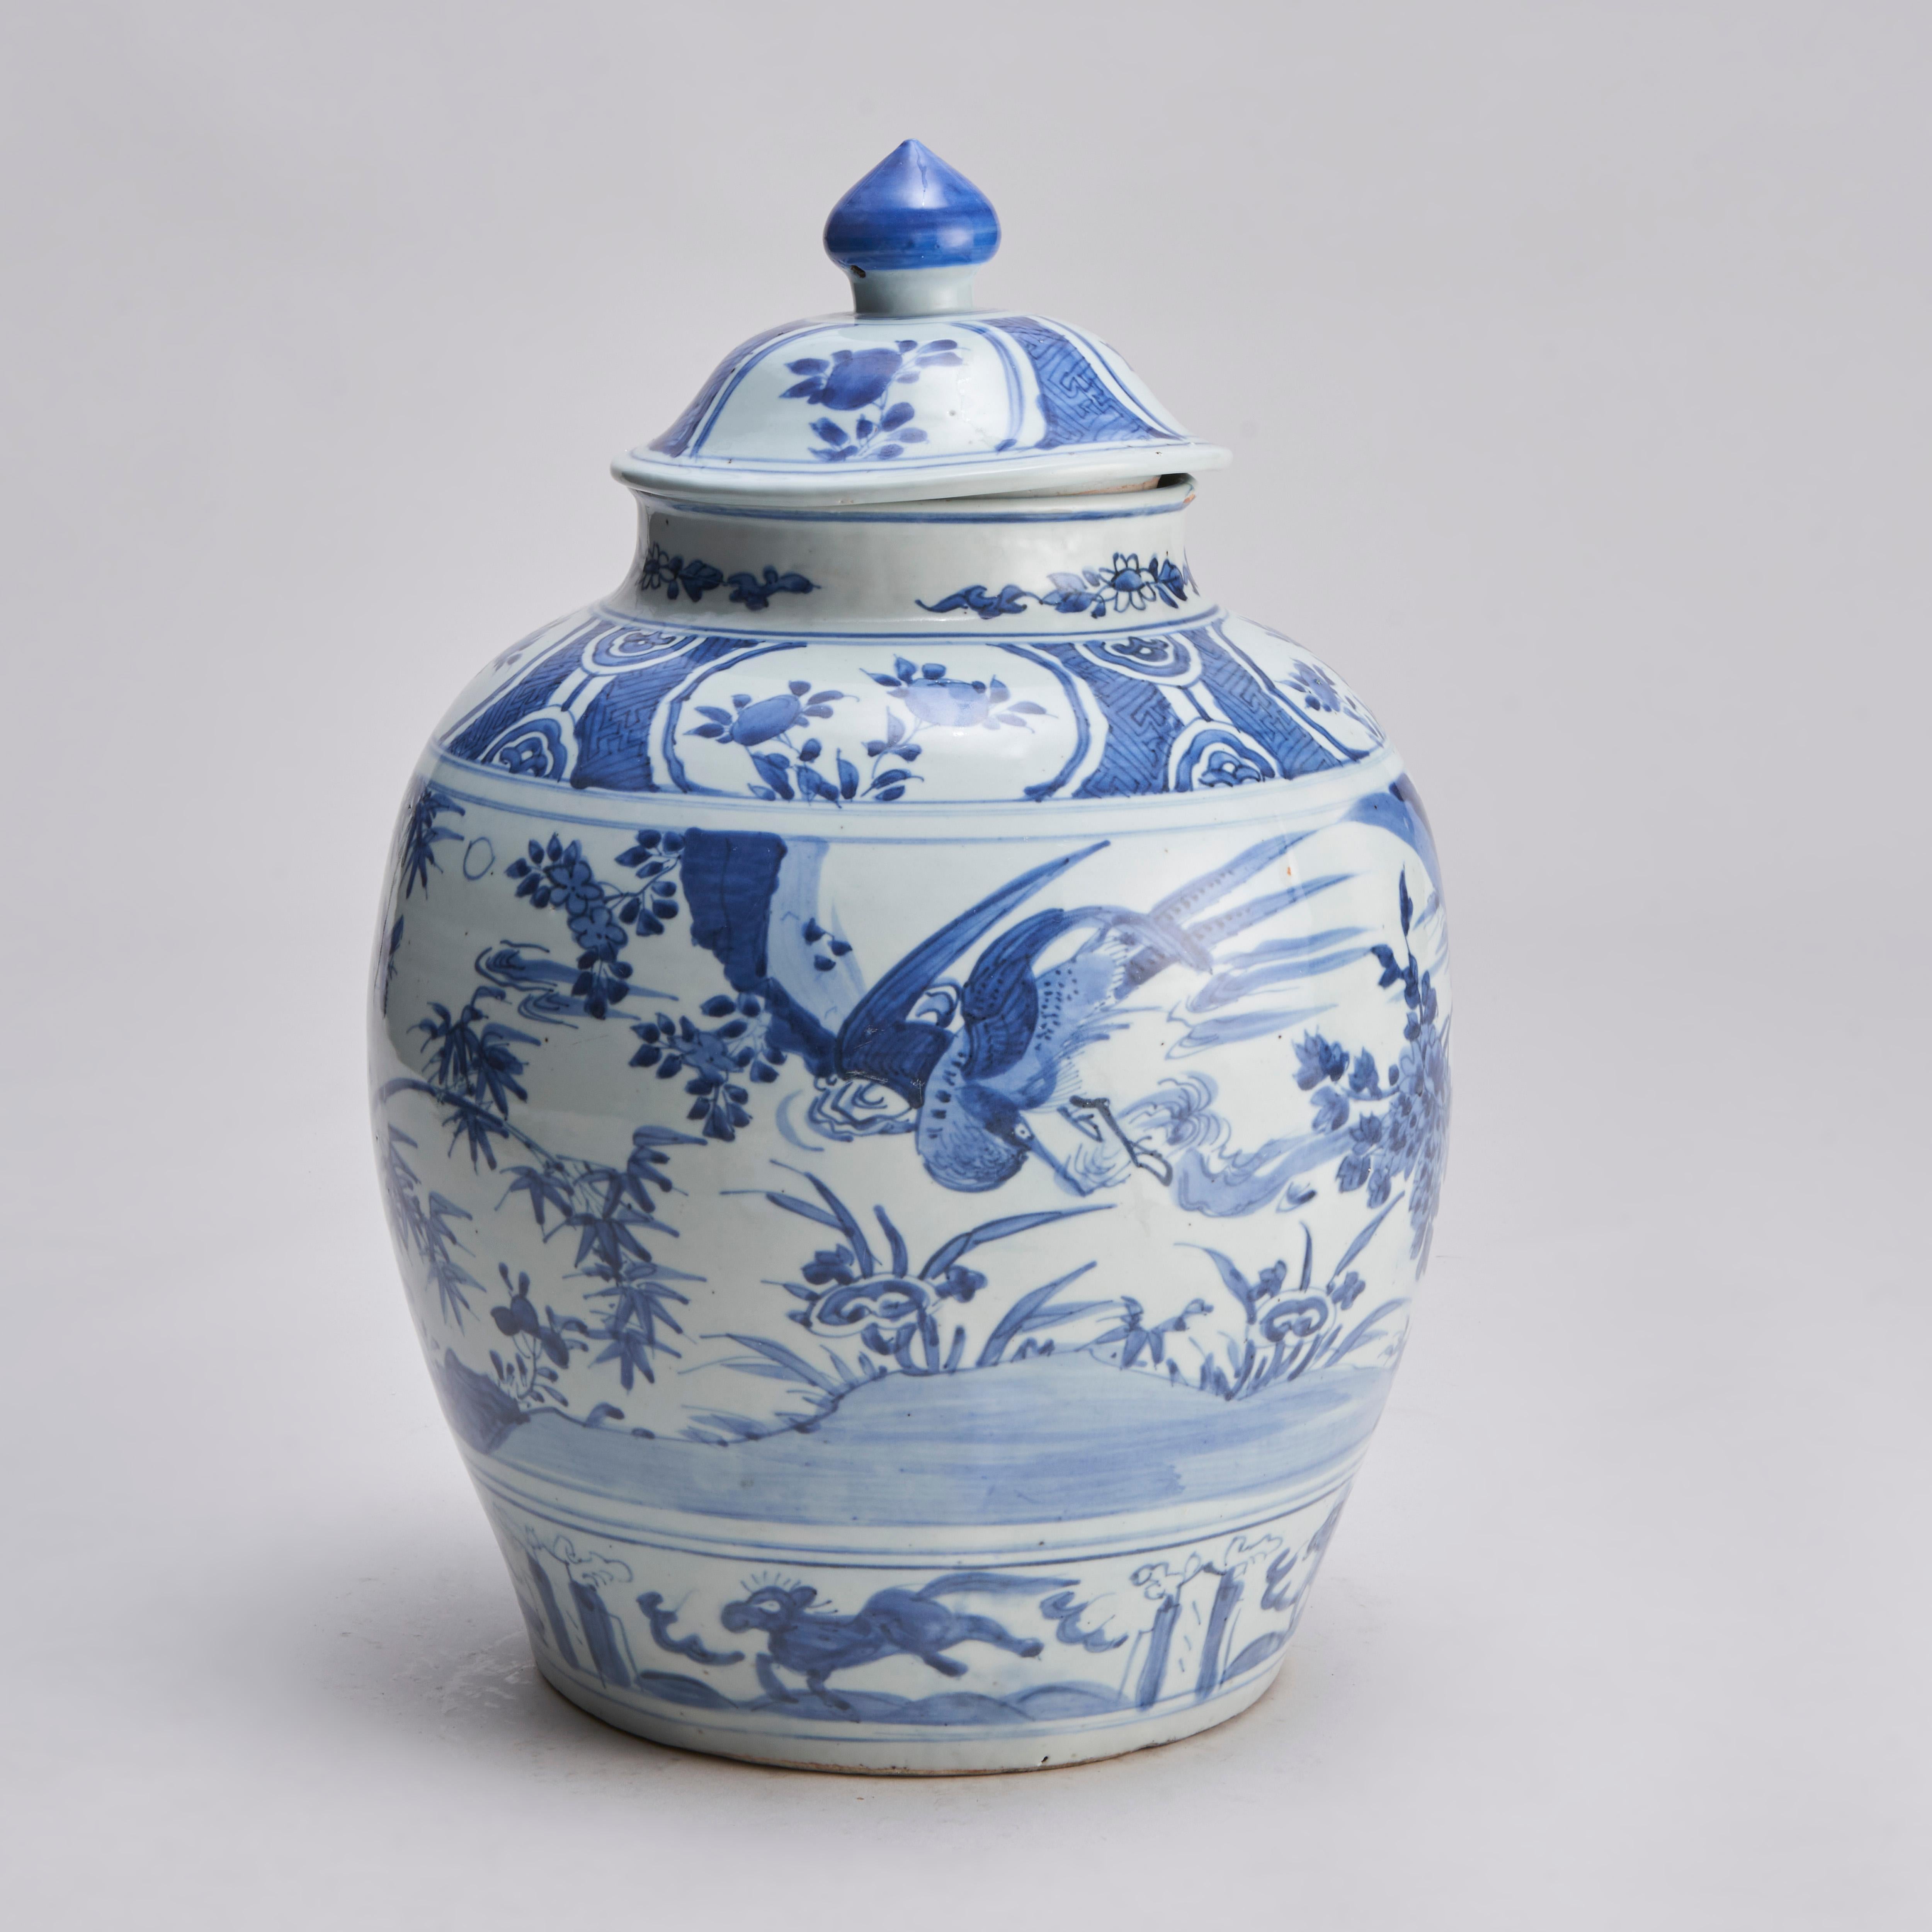 From our collection of antique Chinese porcelain, this early 19th century Chinese blue and white jar and cover with wrap around decoration of pheasants among peonies and bamboo, the bottom border with a design of frolicking horses, the neck with